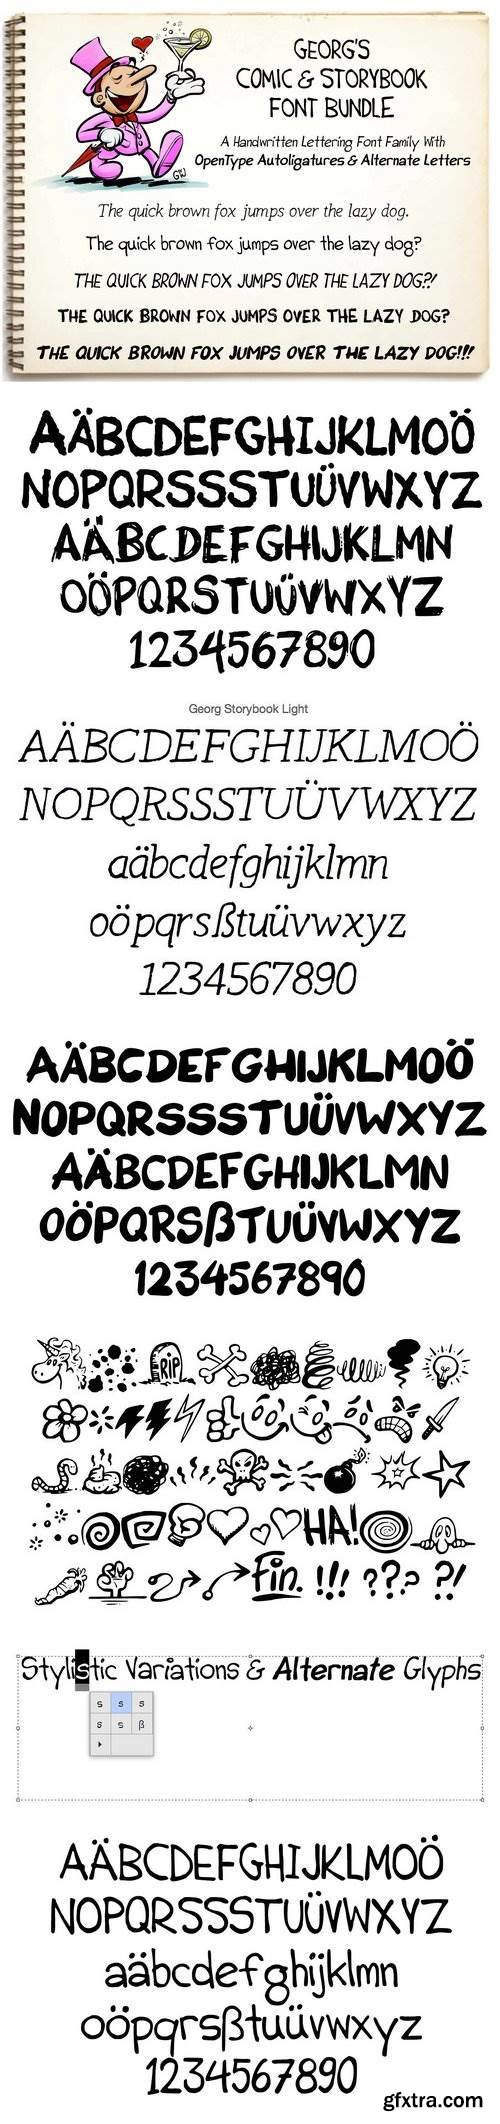 CM - 11+ FONTS for Comics & Storyboards 1393717